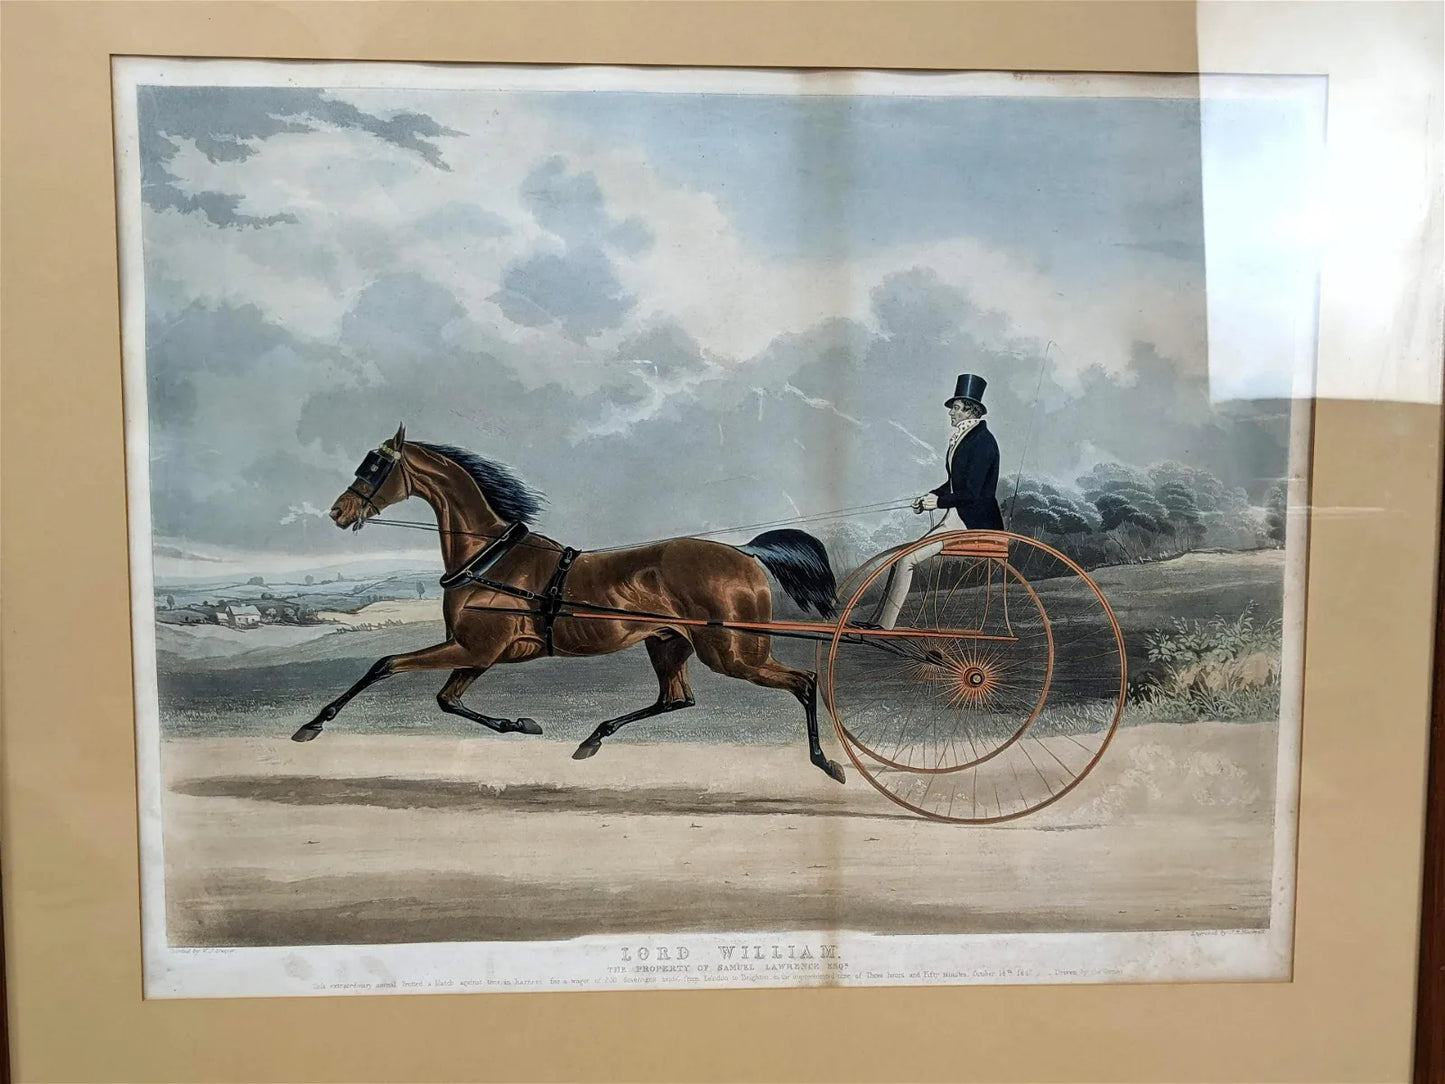 Vintage Horse Print "Lord William, The Property of Samuel Lawrence."